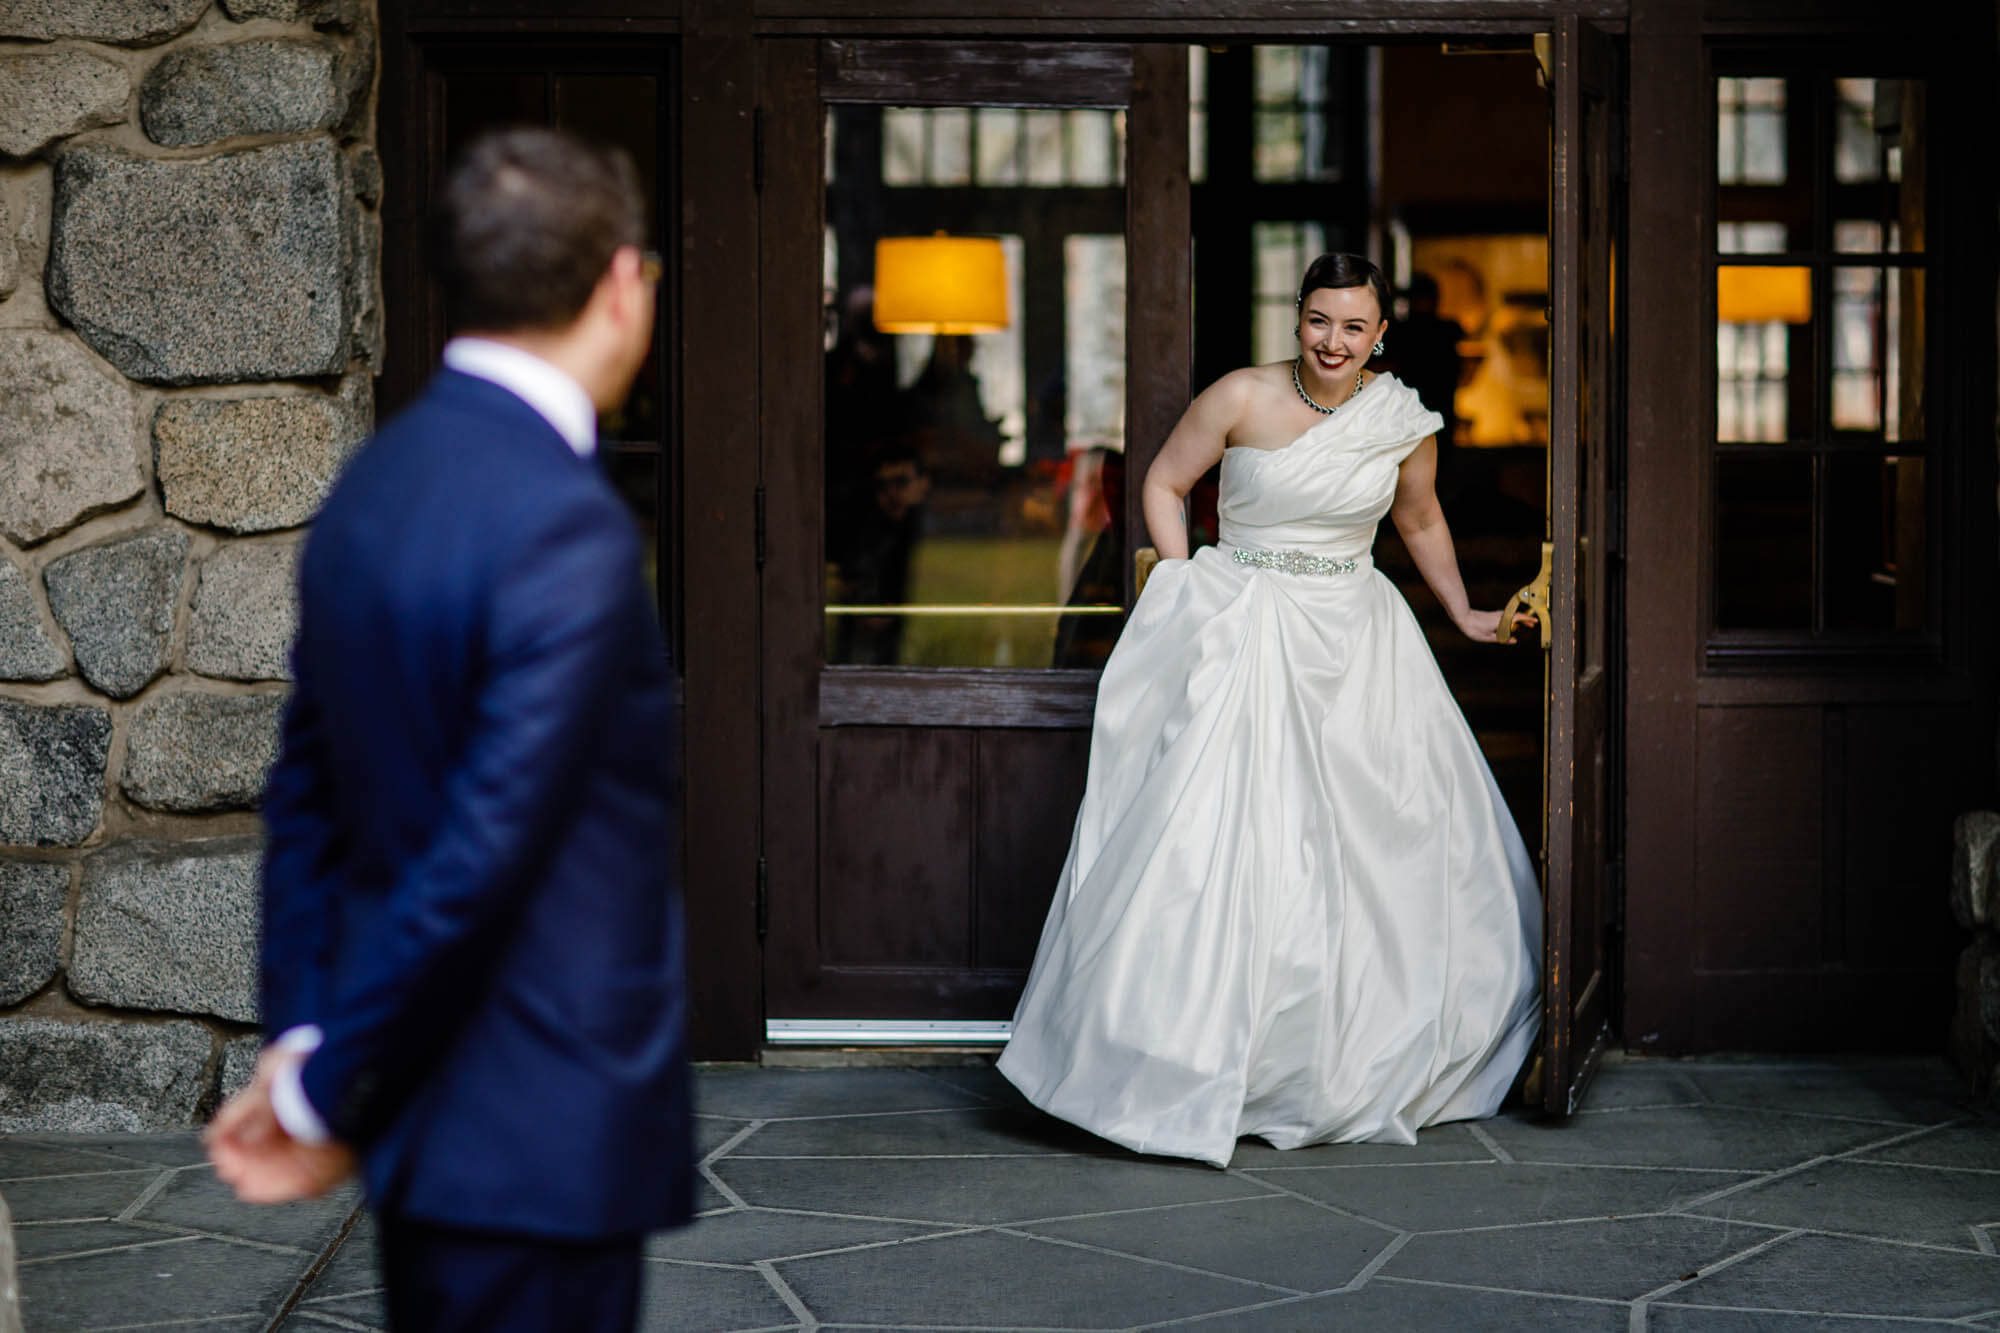 Bride smiles and laughs as she comes out of the Ahwahnee during the first look